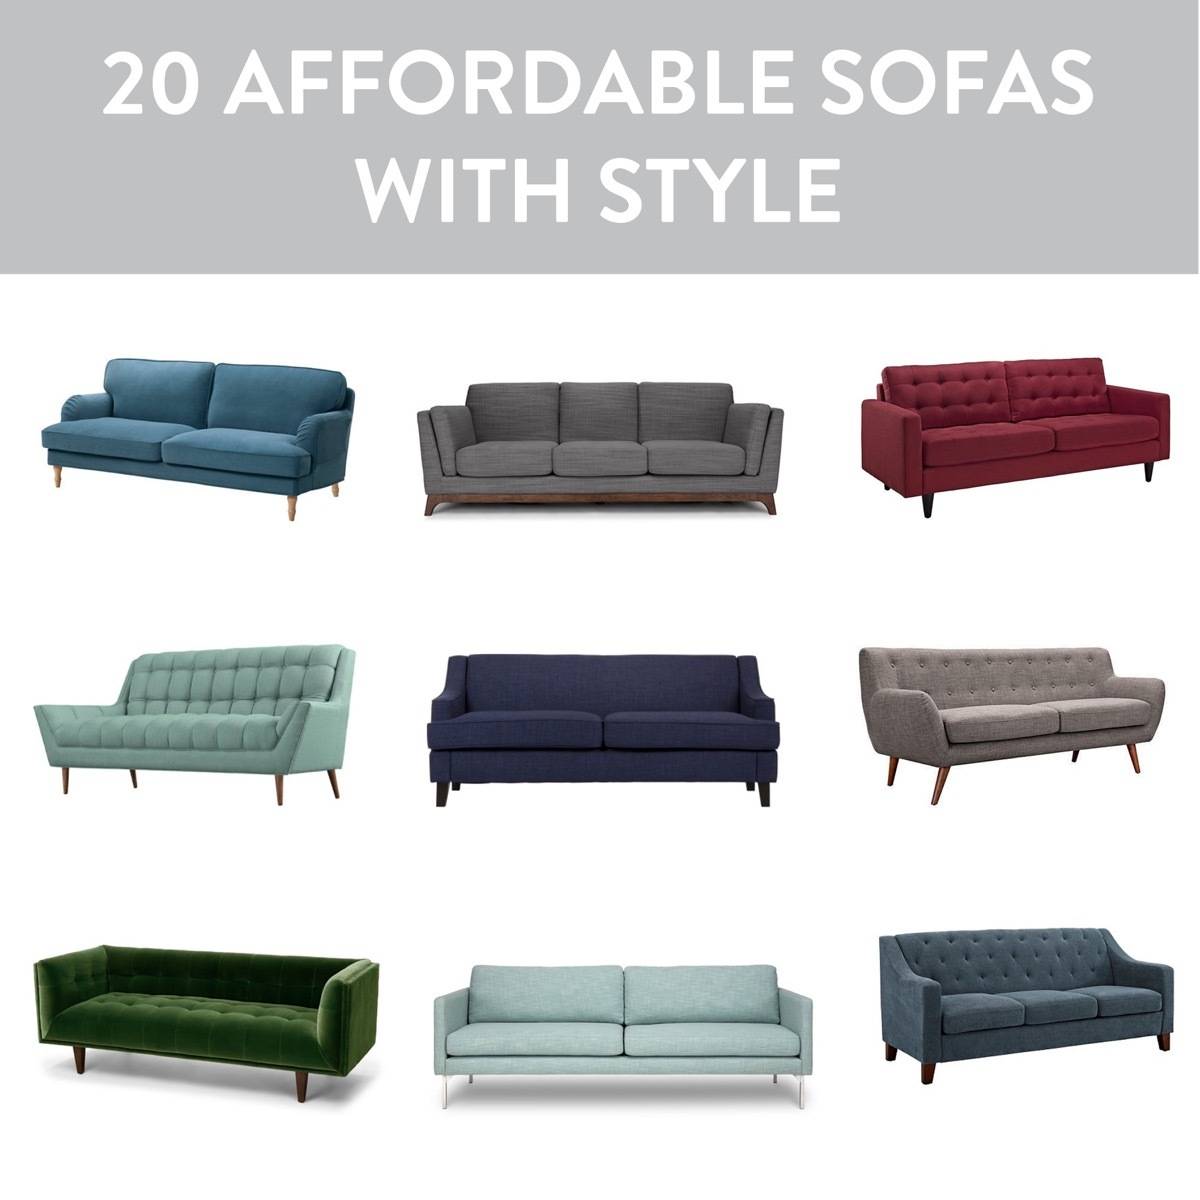 Affordable Sofa Options 20 Of Our Favorite Stylish Seating Options